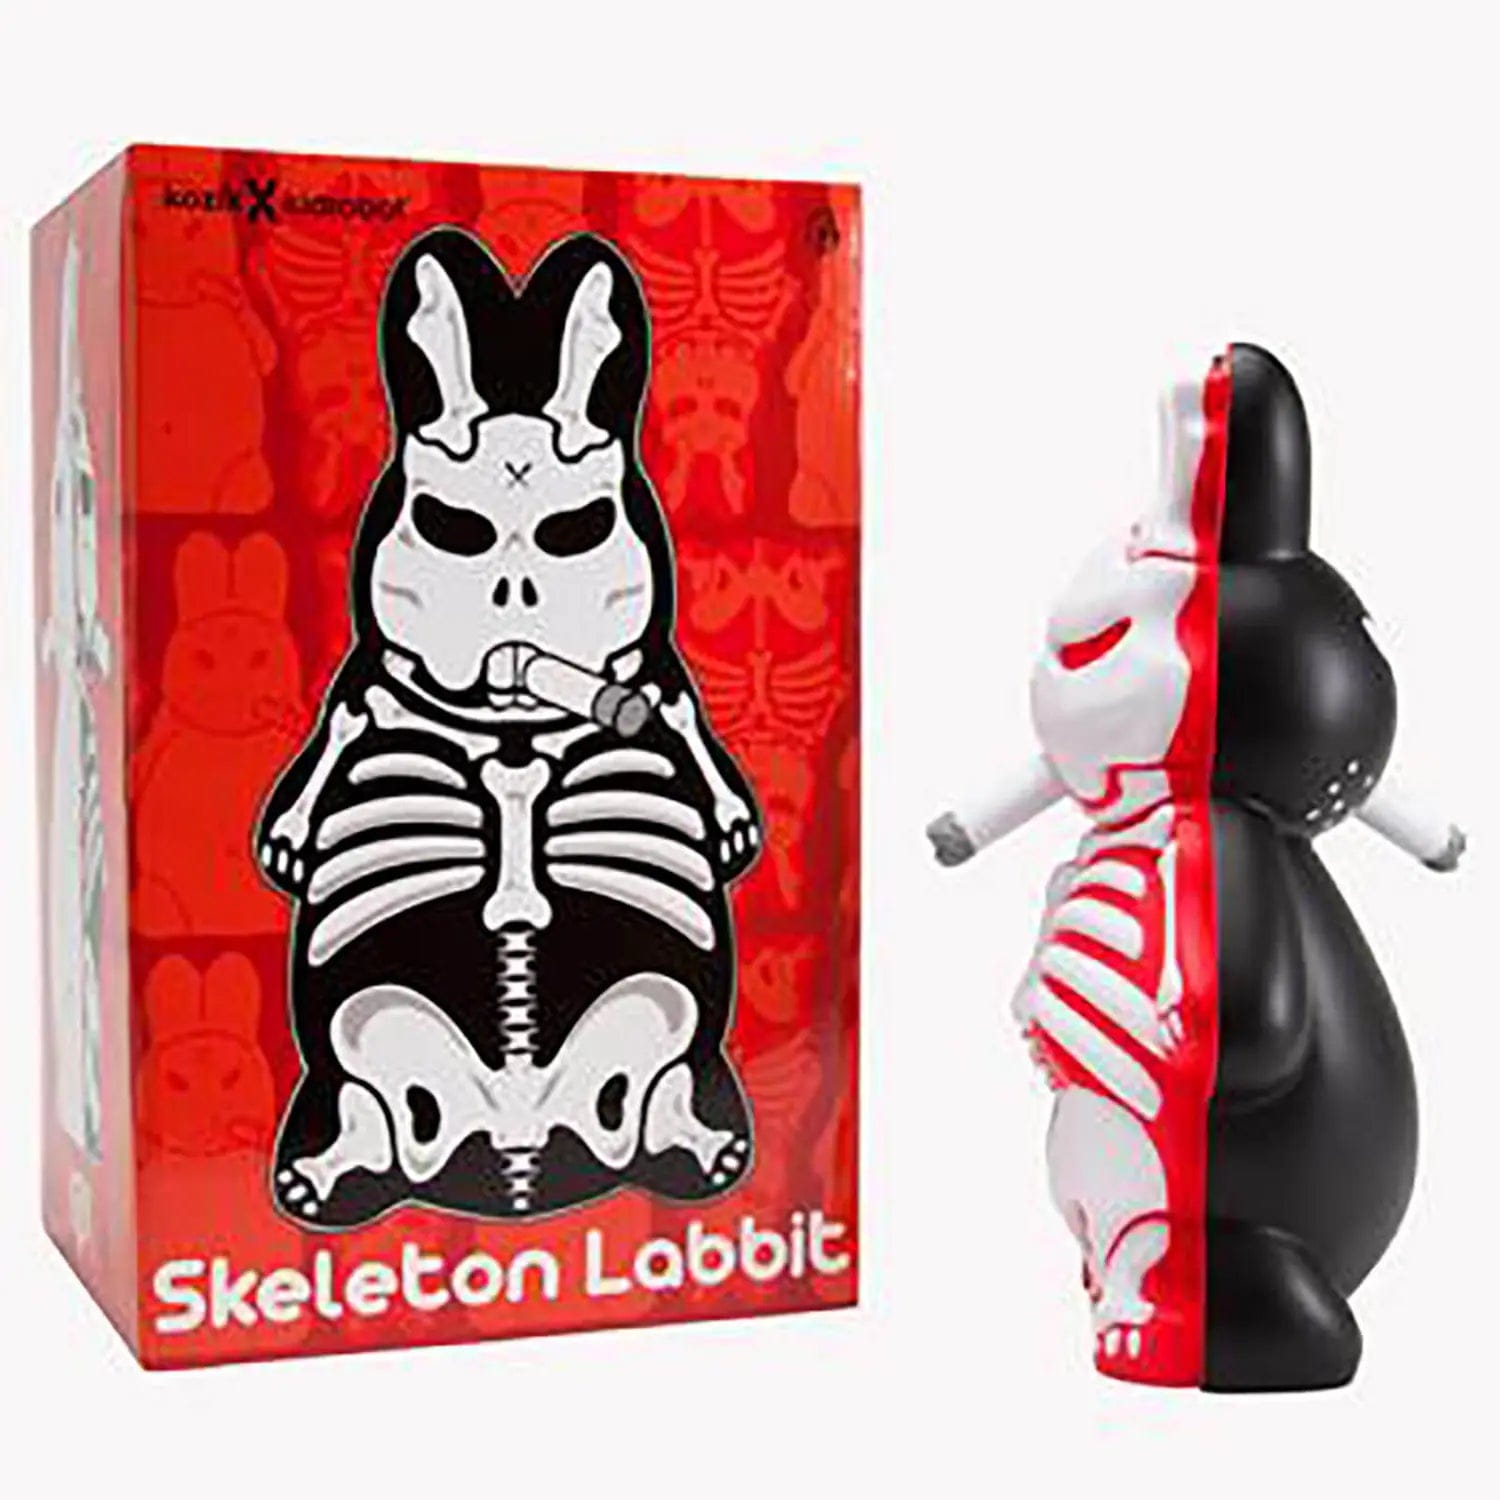 RED By Frank Kozik. Limited to 666 Pieces. Kawaii Gifts 883975110857